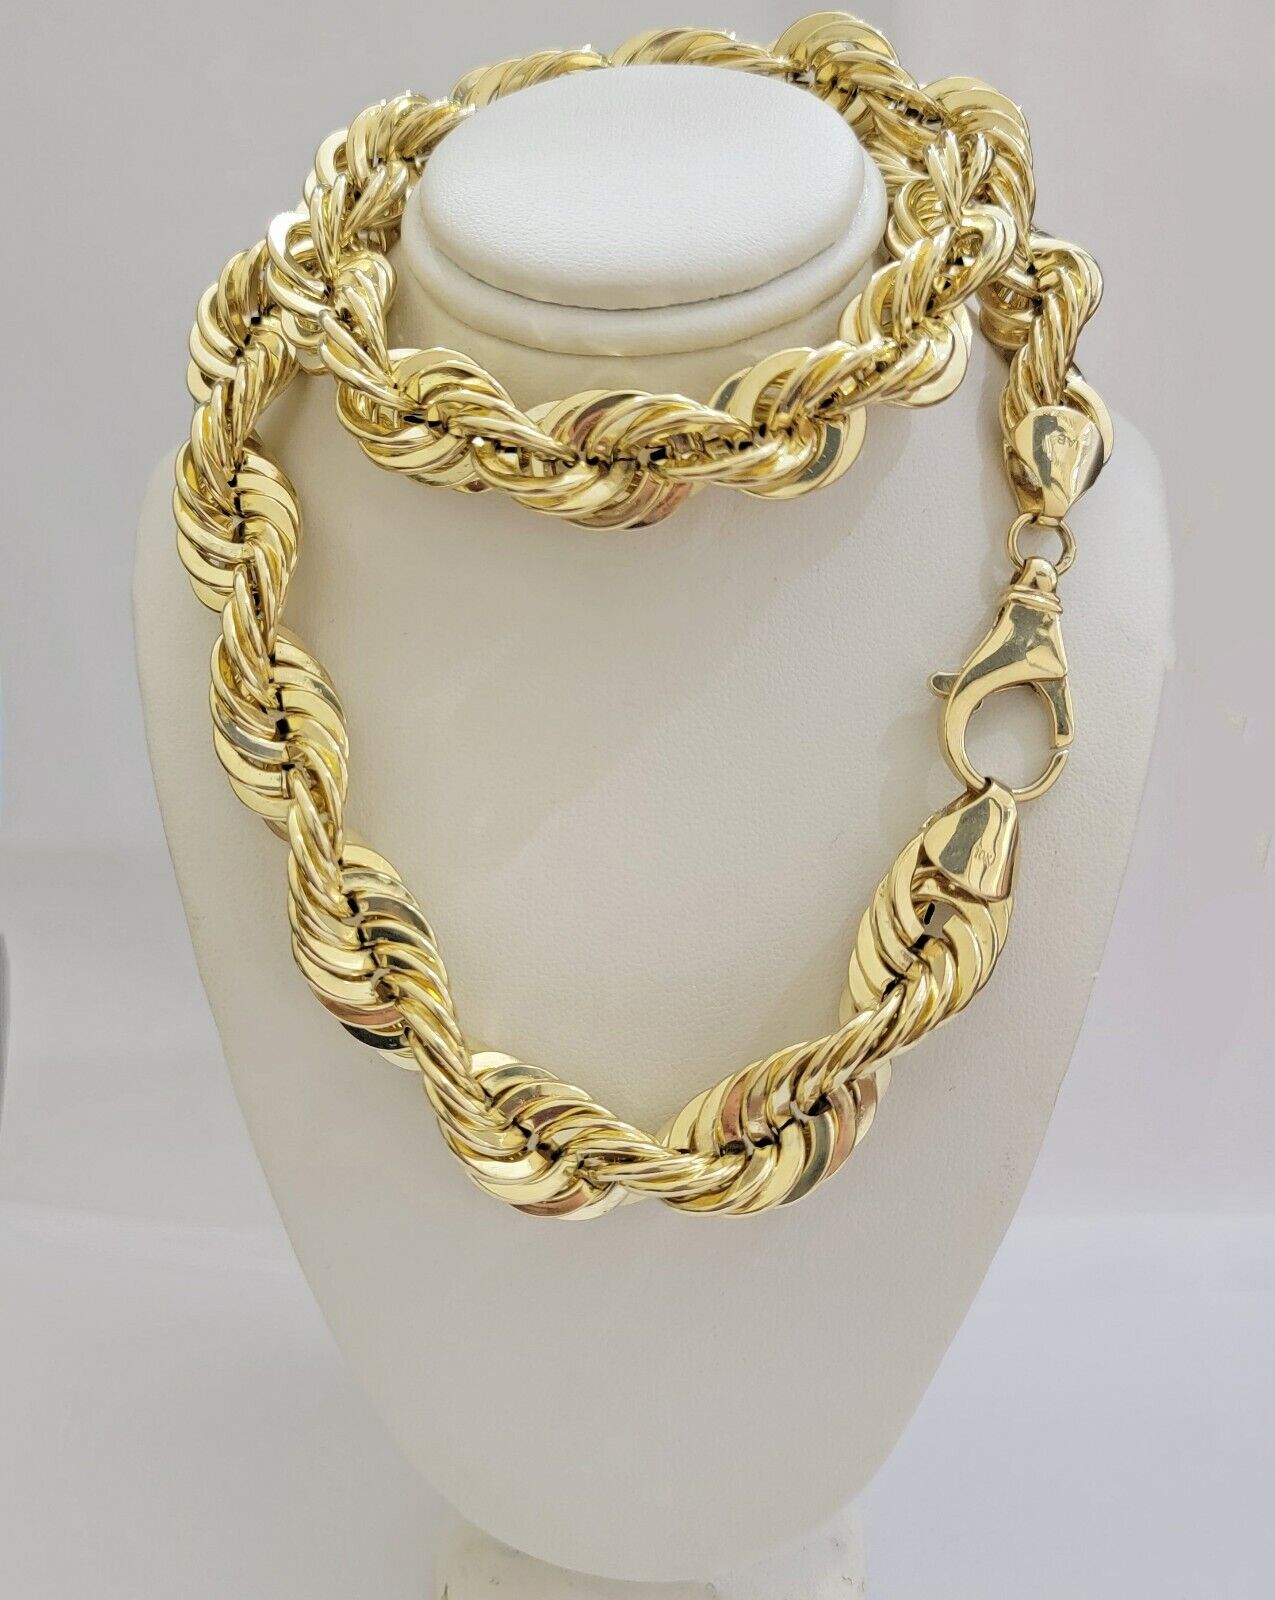 REAL 10K Yellow Gold Rope Chain Necklace 15MM 22" Inch Choker Diamond Cut SALE